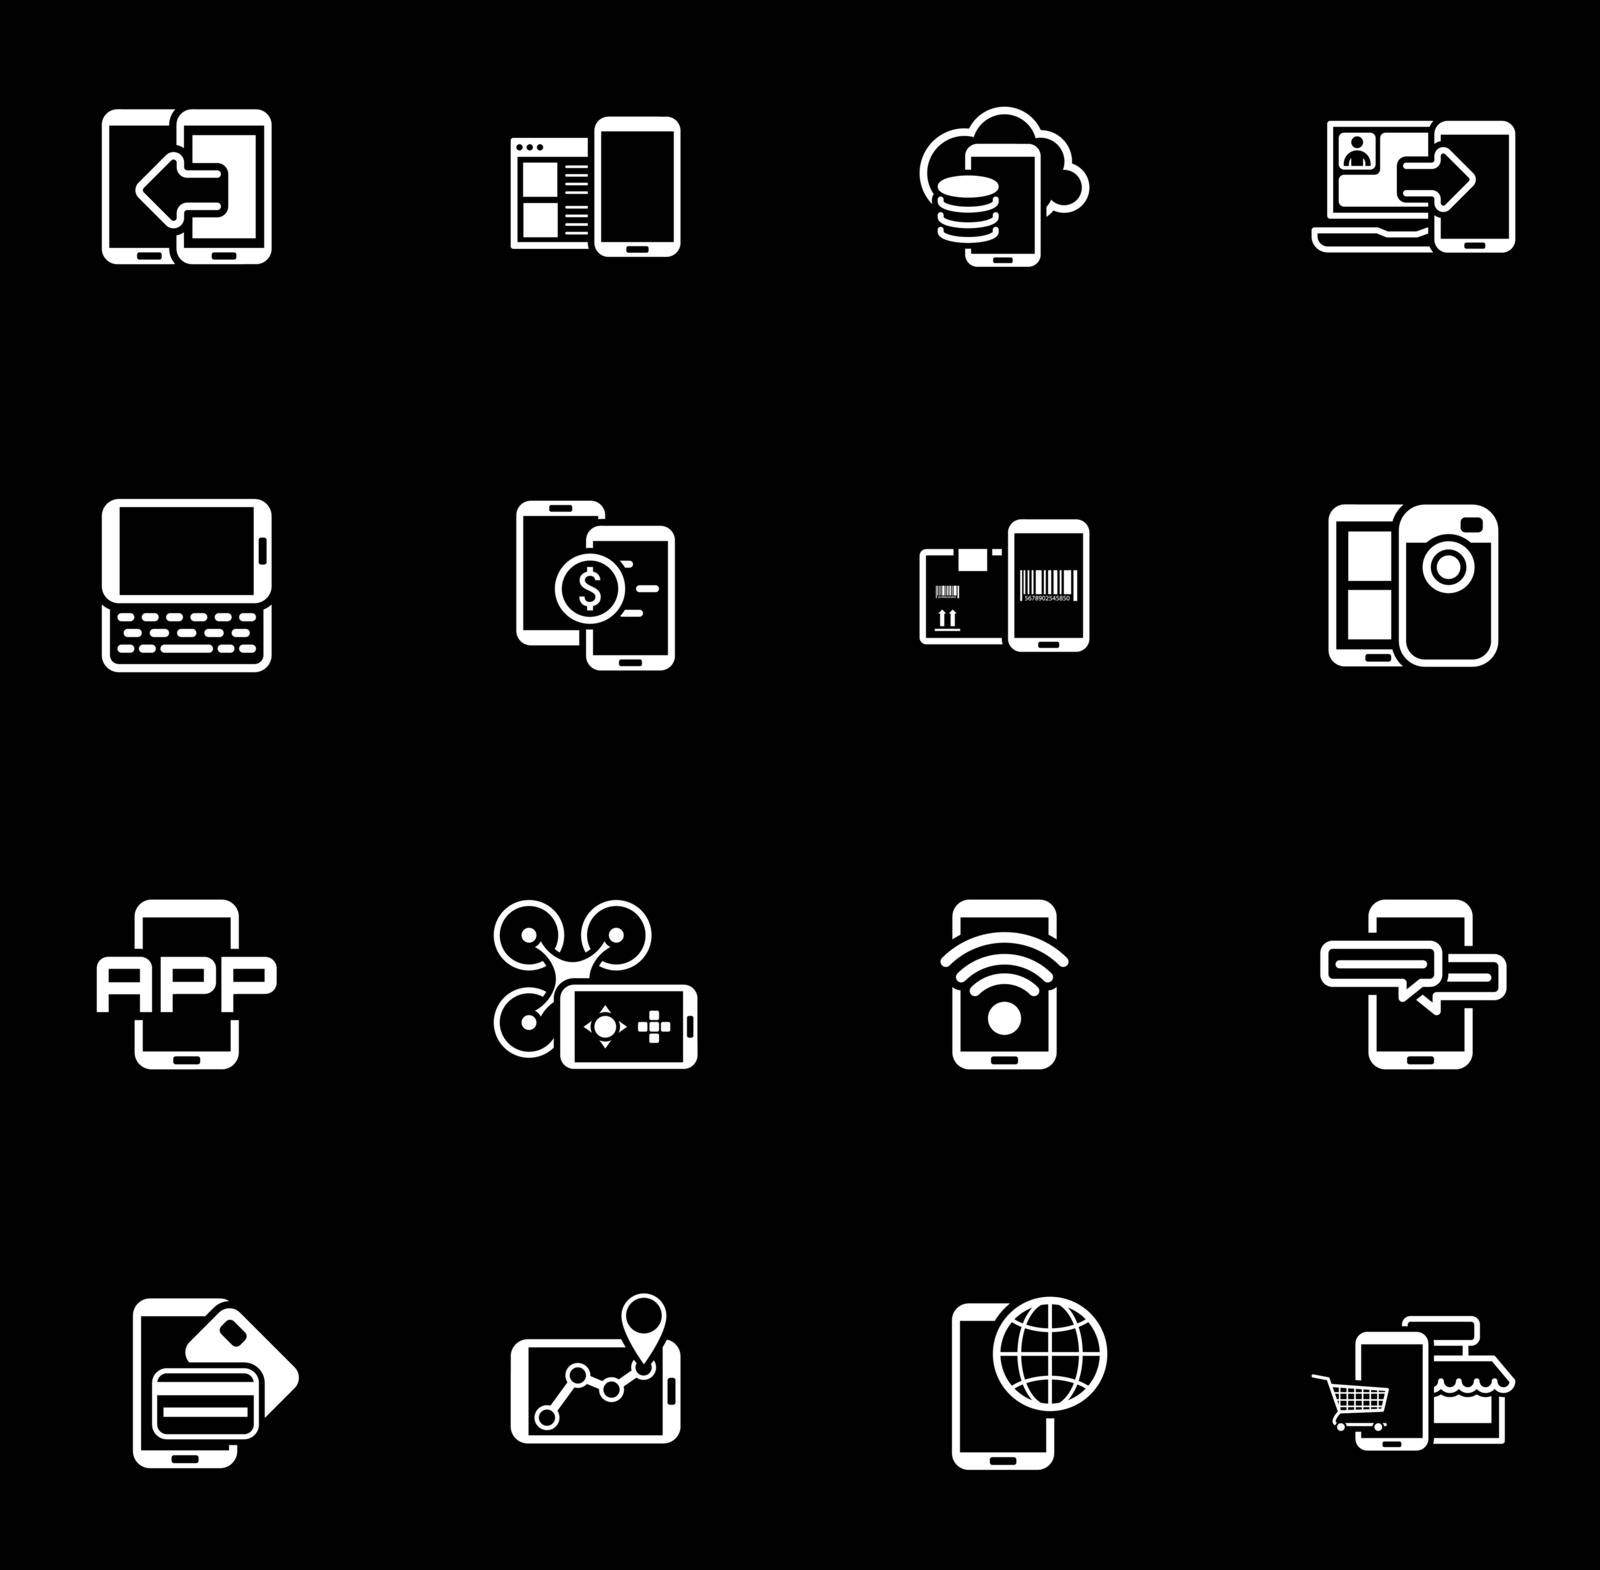 Flat Design Mobile Devices and Services Icons Set. Isolated Illustration.